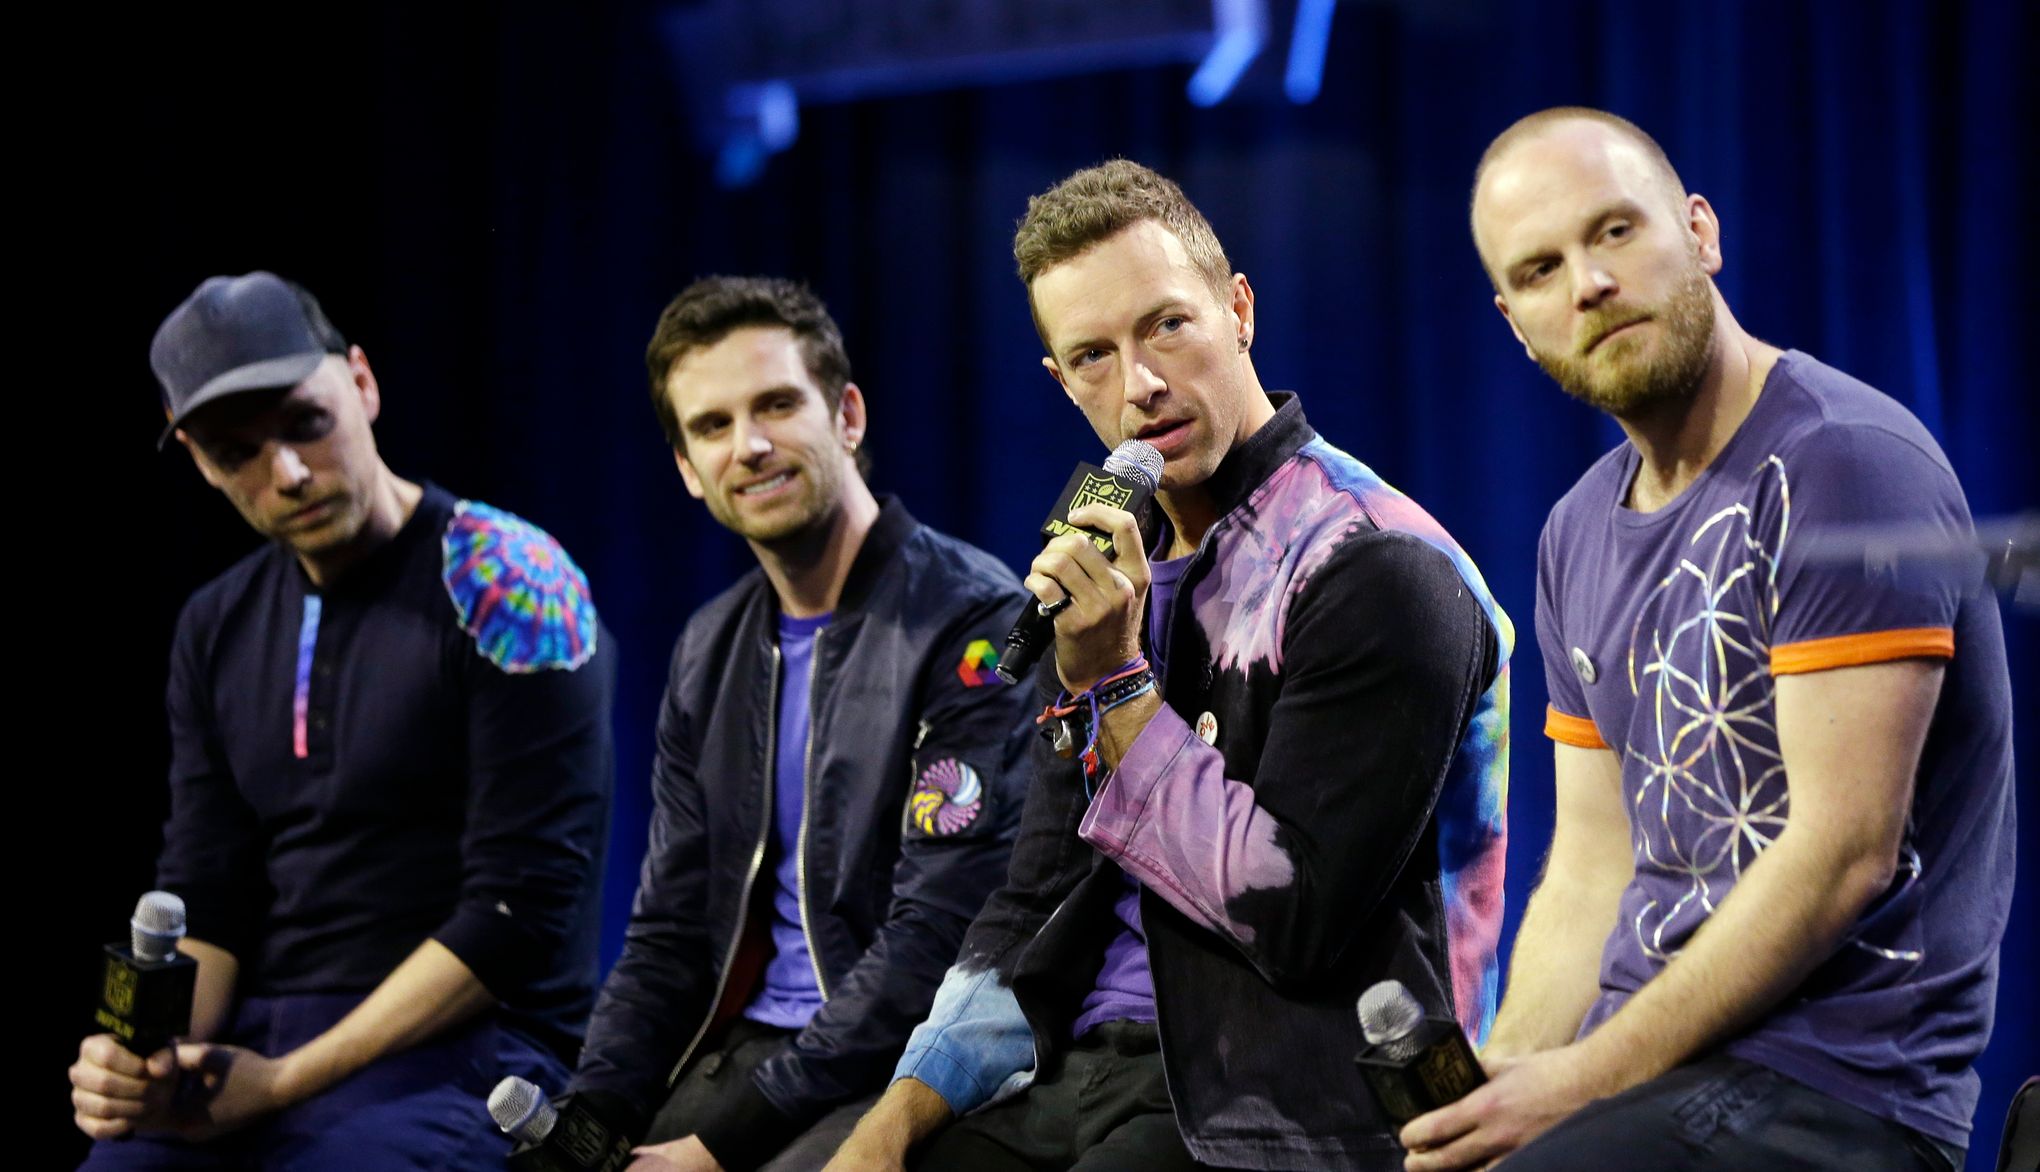 Will Champion of Coldplay during Coldplay Press Conference - Final